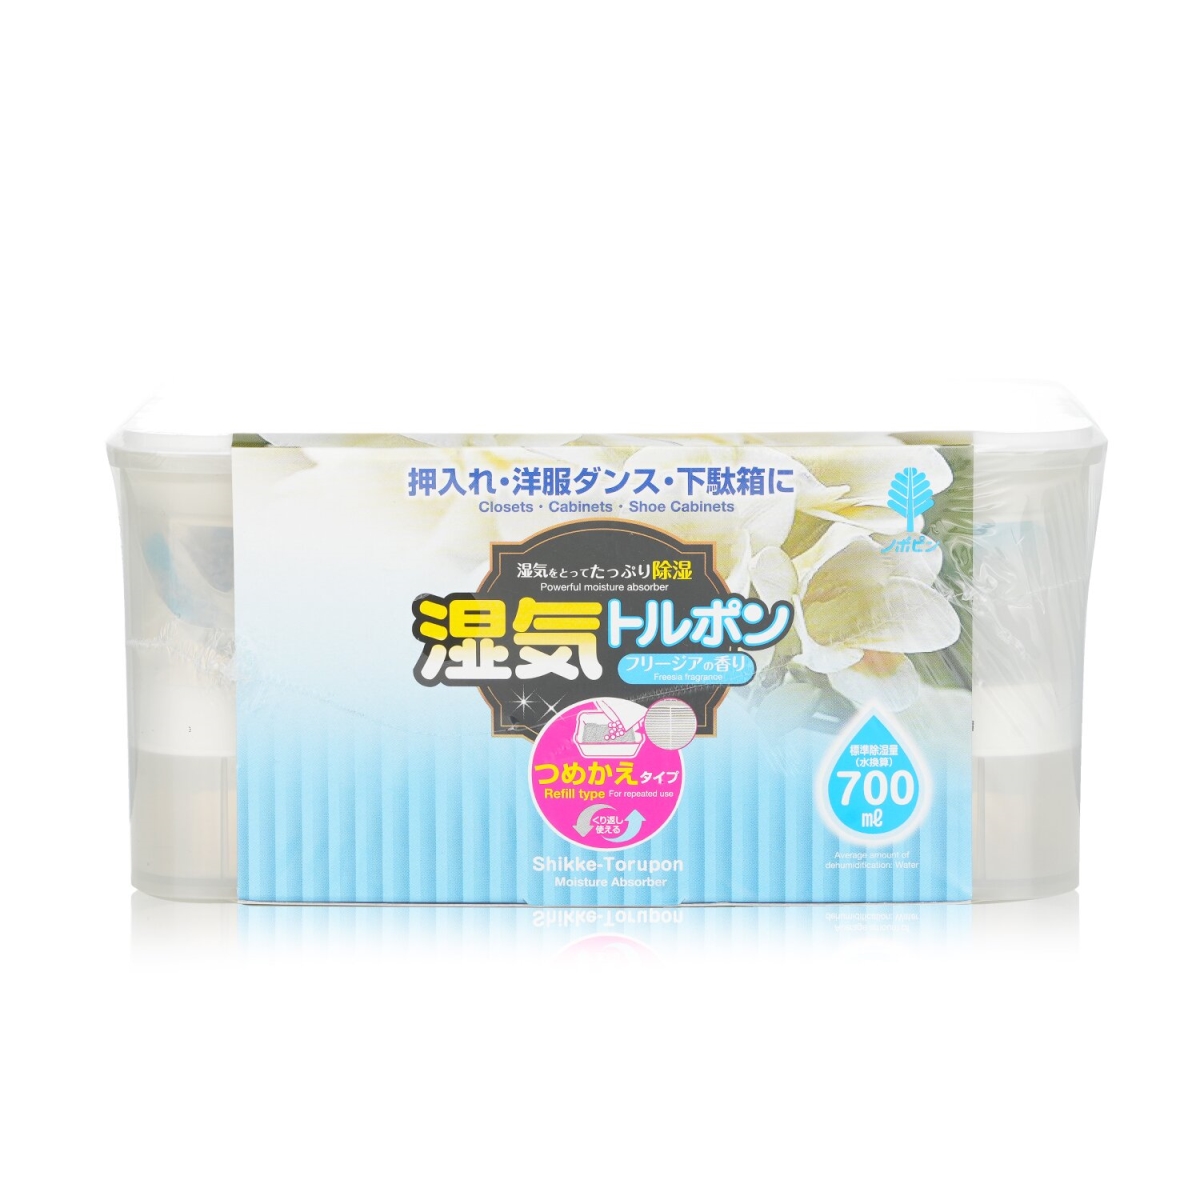 Picture of Kokubo 277697 700 ml Powerful Moisture Absorber for Closets&#44; Cabinets & Shoe Cabinets - Freesia Fragrance